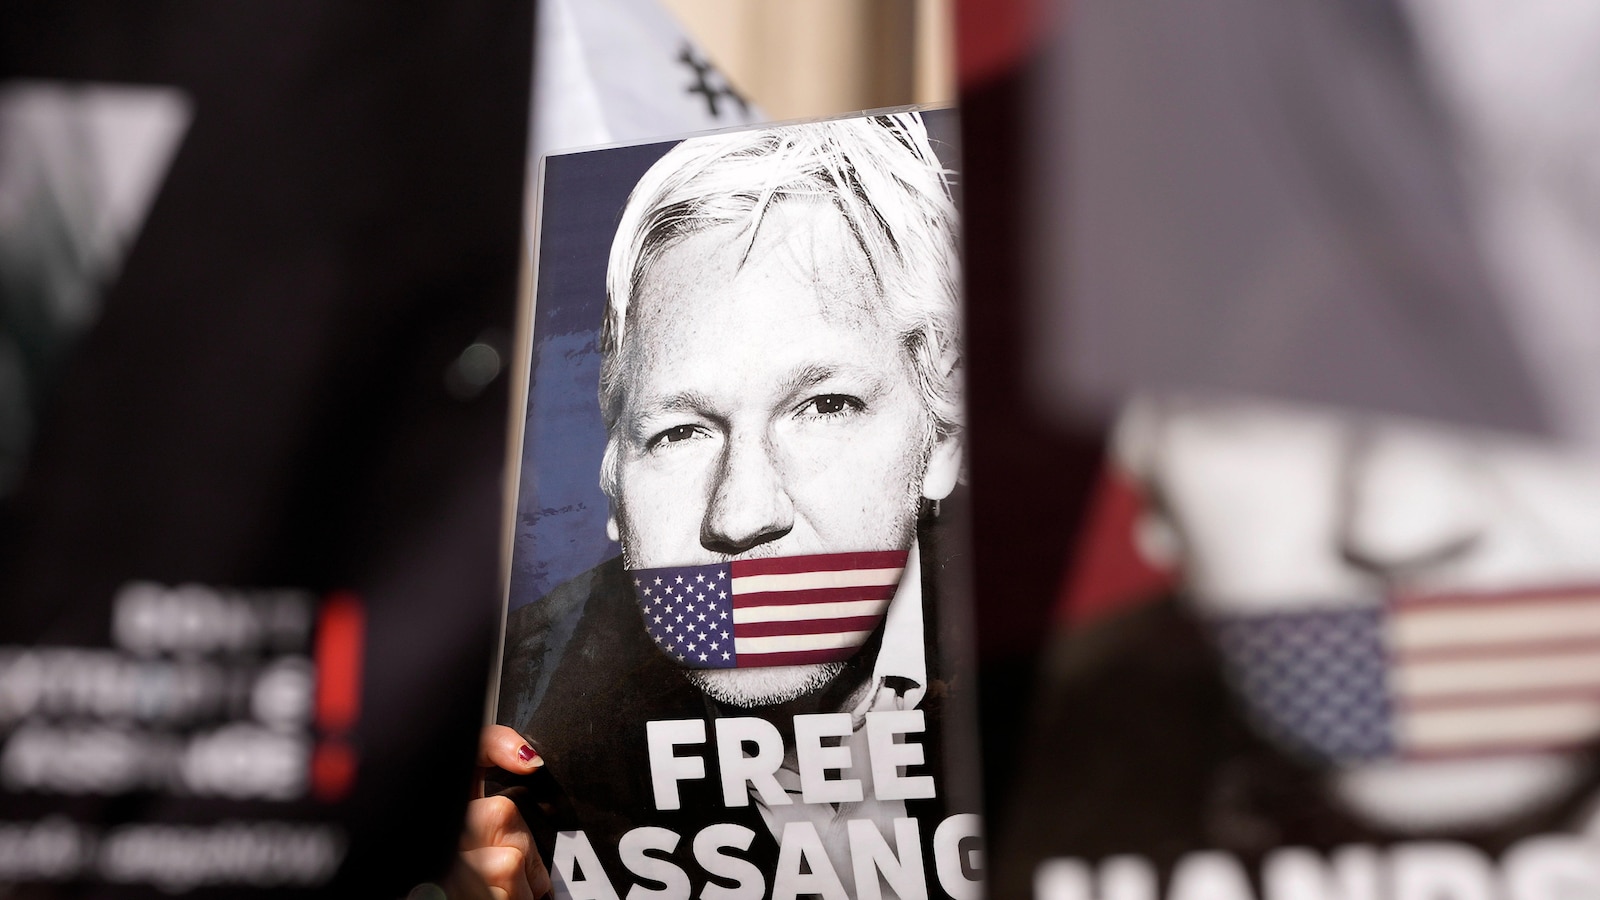 Australian leaders cautiously welcome expected plea that could bring WikiLeaks founder Assange home #Australian #leaders #cautiously #expected #plea #bring #WikiLeaks #founder #Assange #home